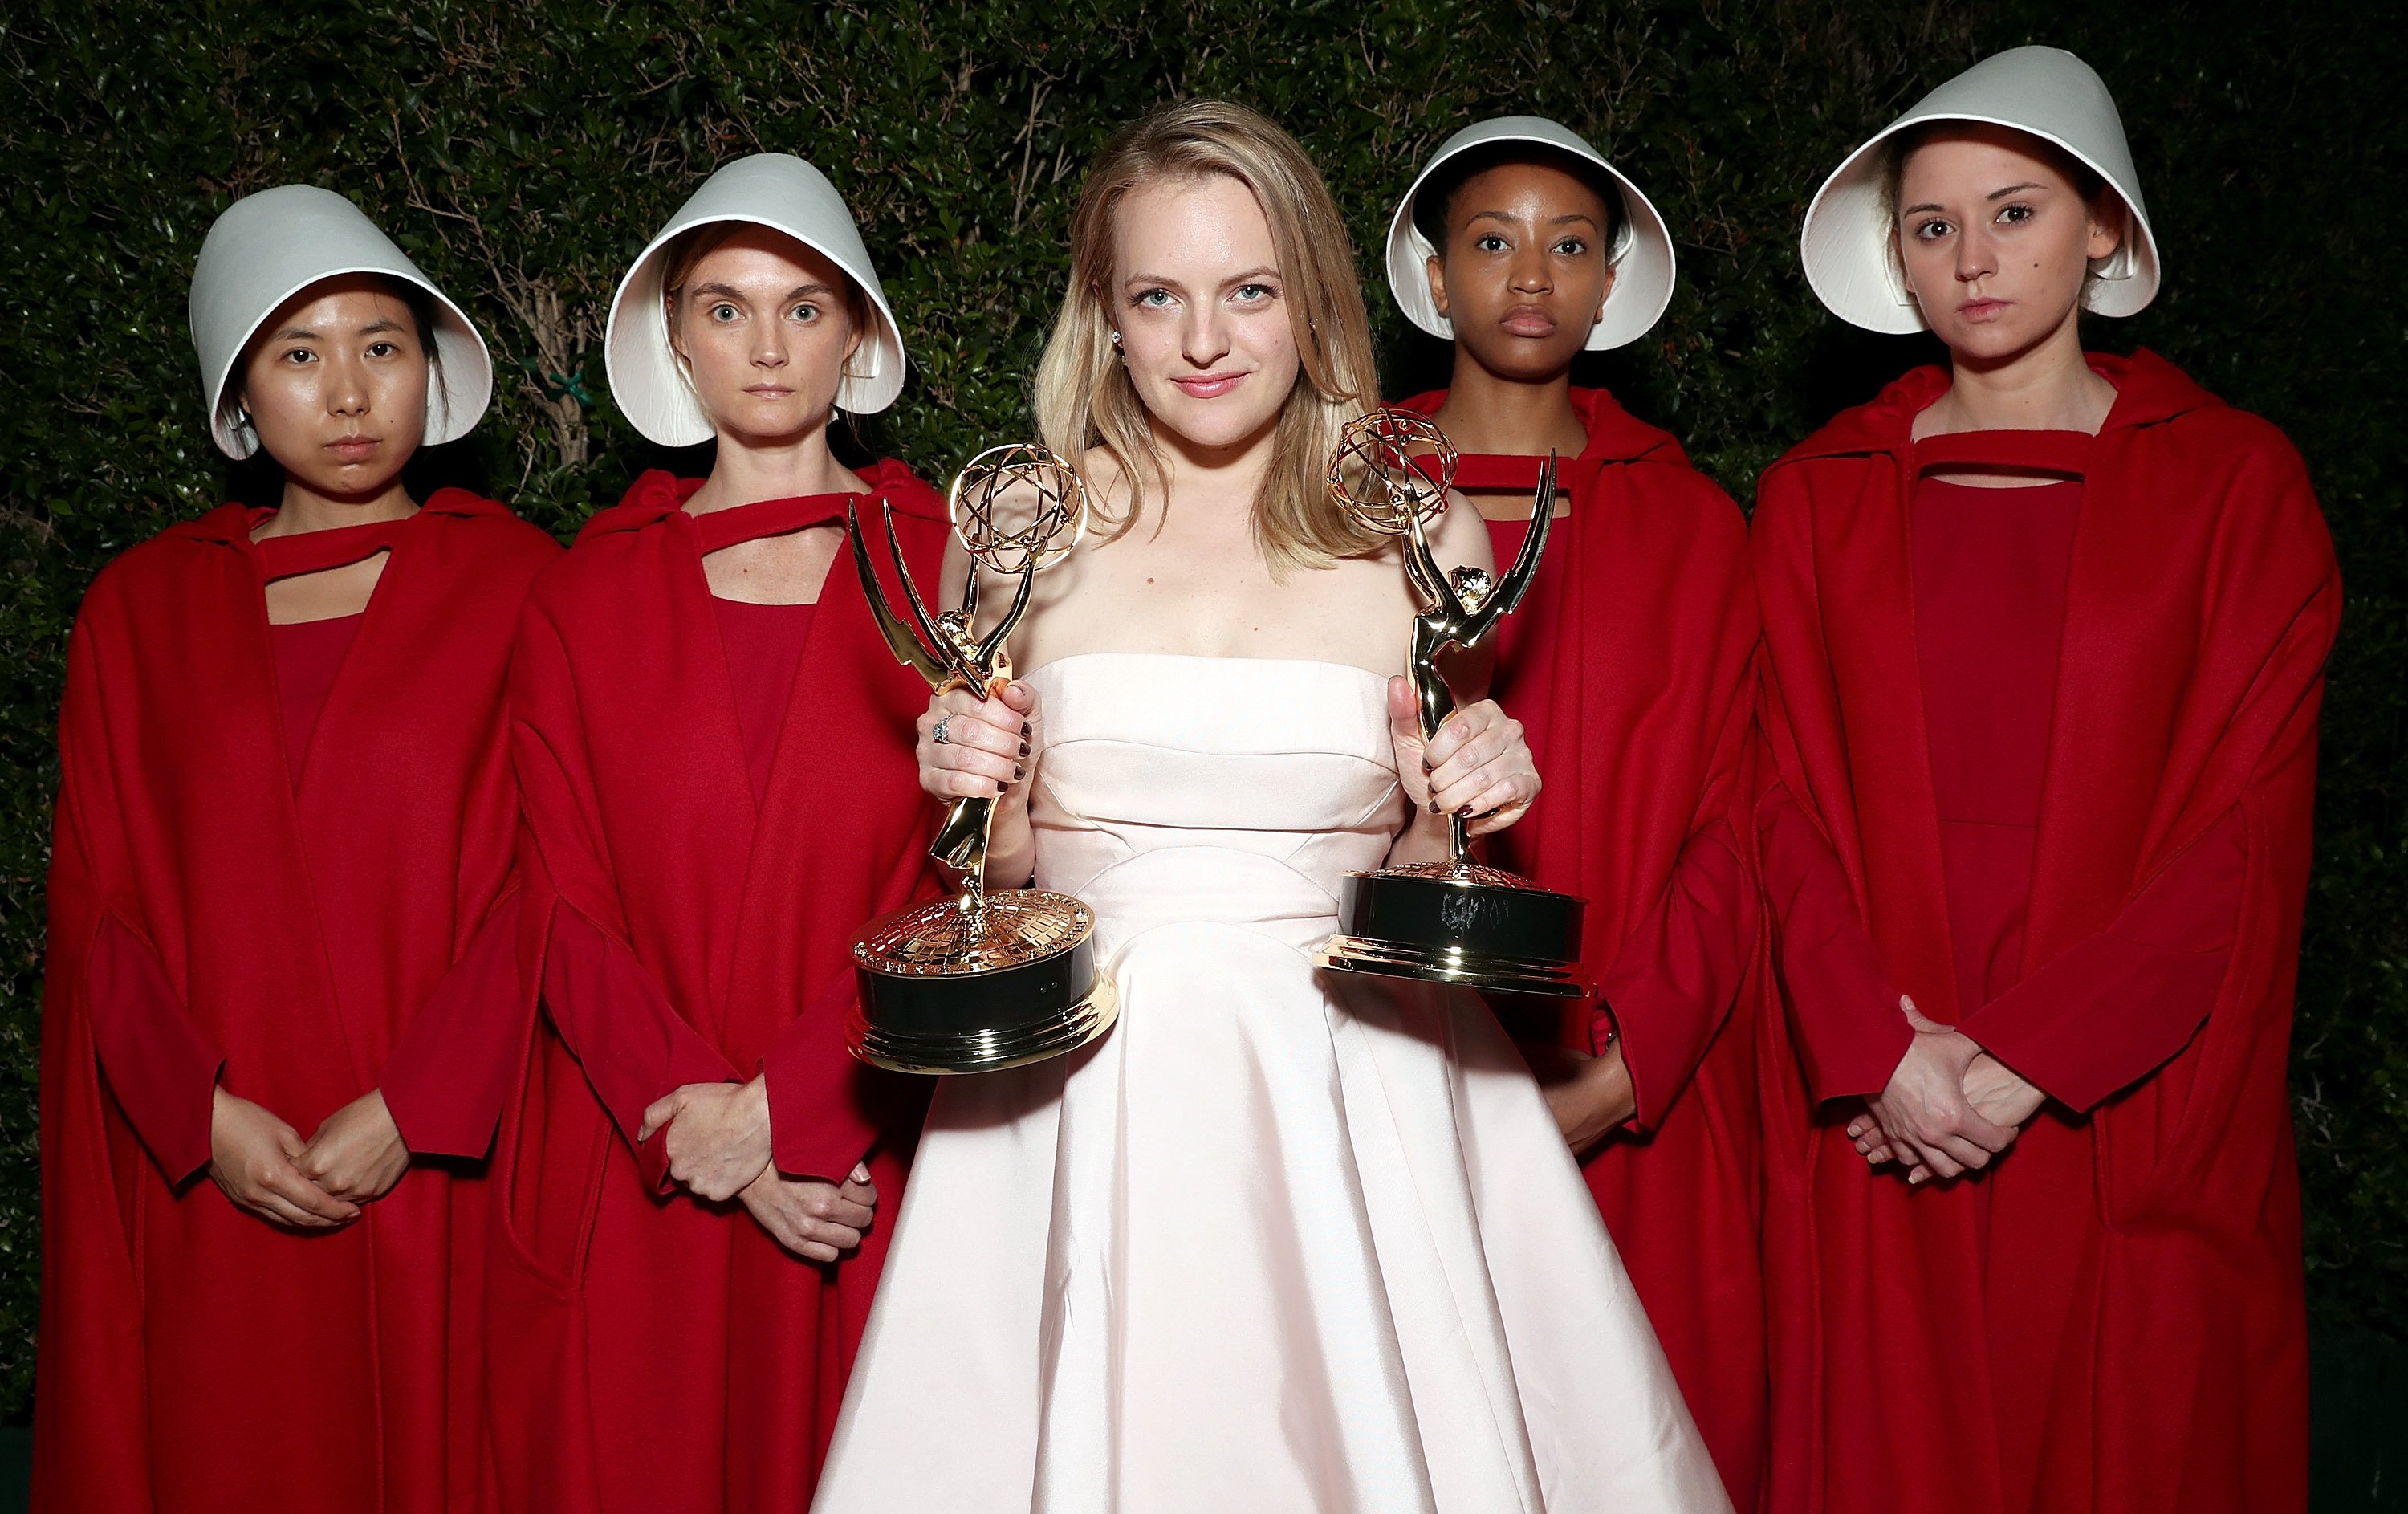 ‘The Handmaid’s Tale’: How Does Elisabeth Moss Feel About Joseph Fiennes’ Exit?